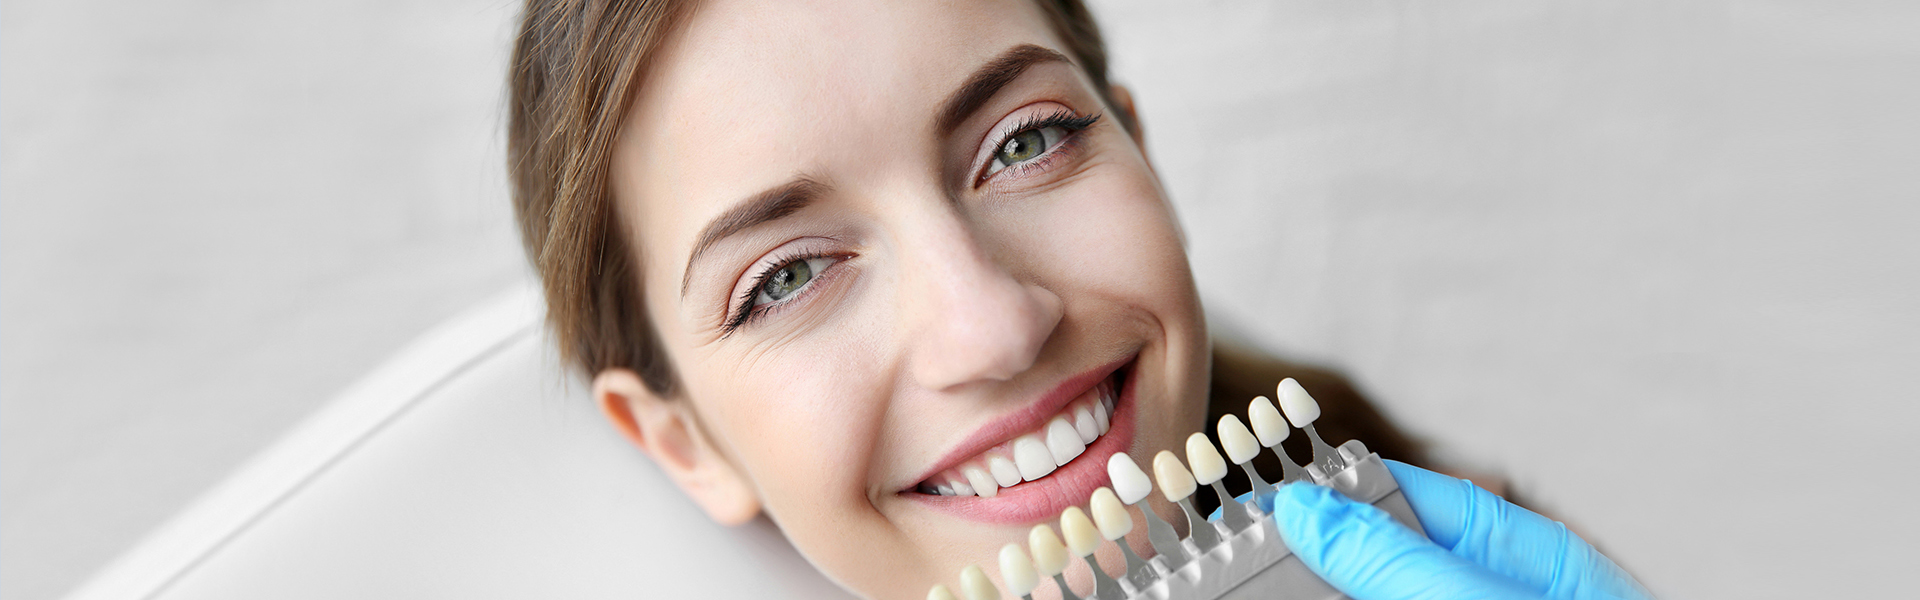 Can Dental Veneers Really Change Your Smile As Described?